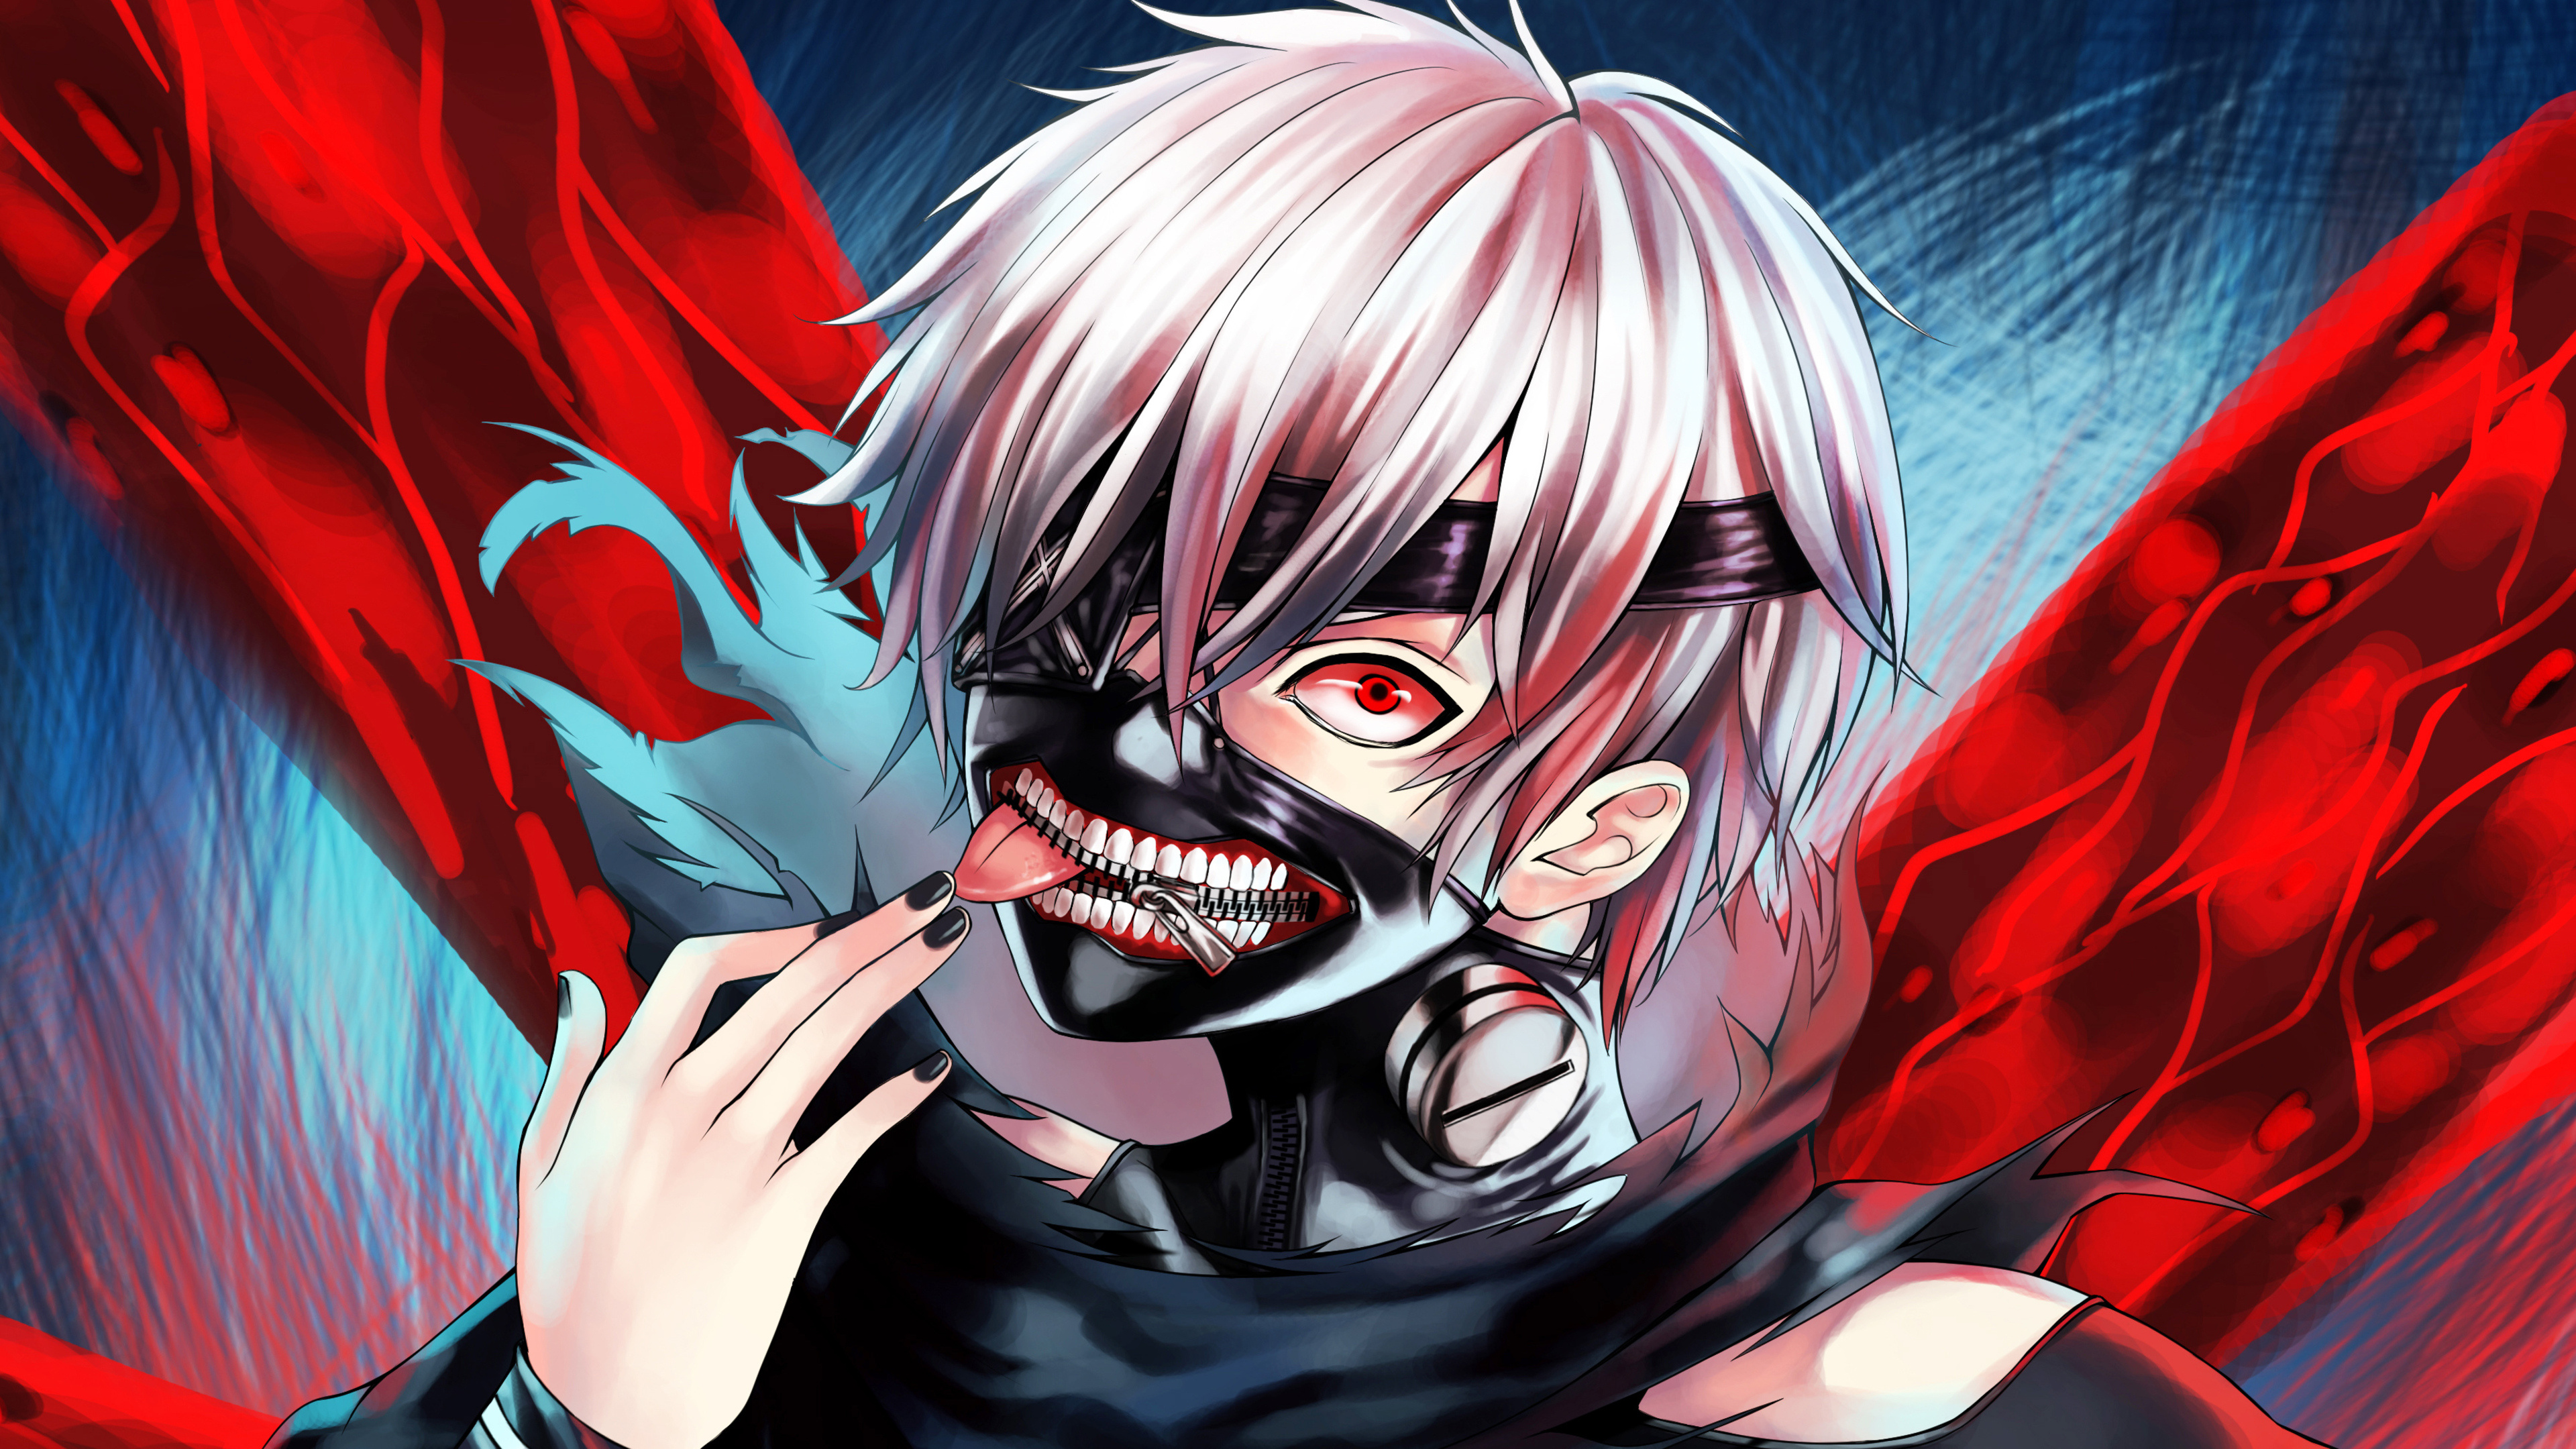 Download Iphone 12 Anime Boy Tokyo Ghoul Wallpaper | Wallpapers.com